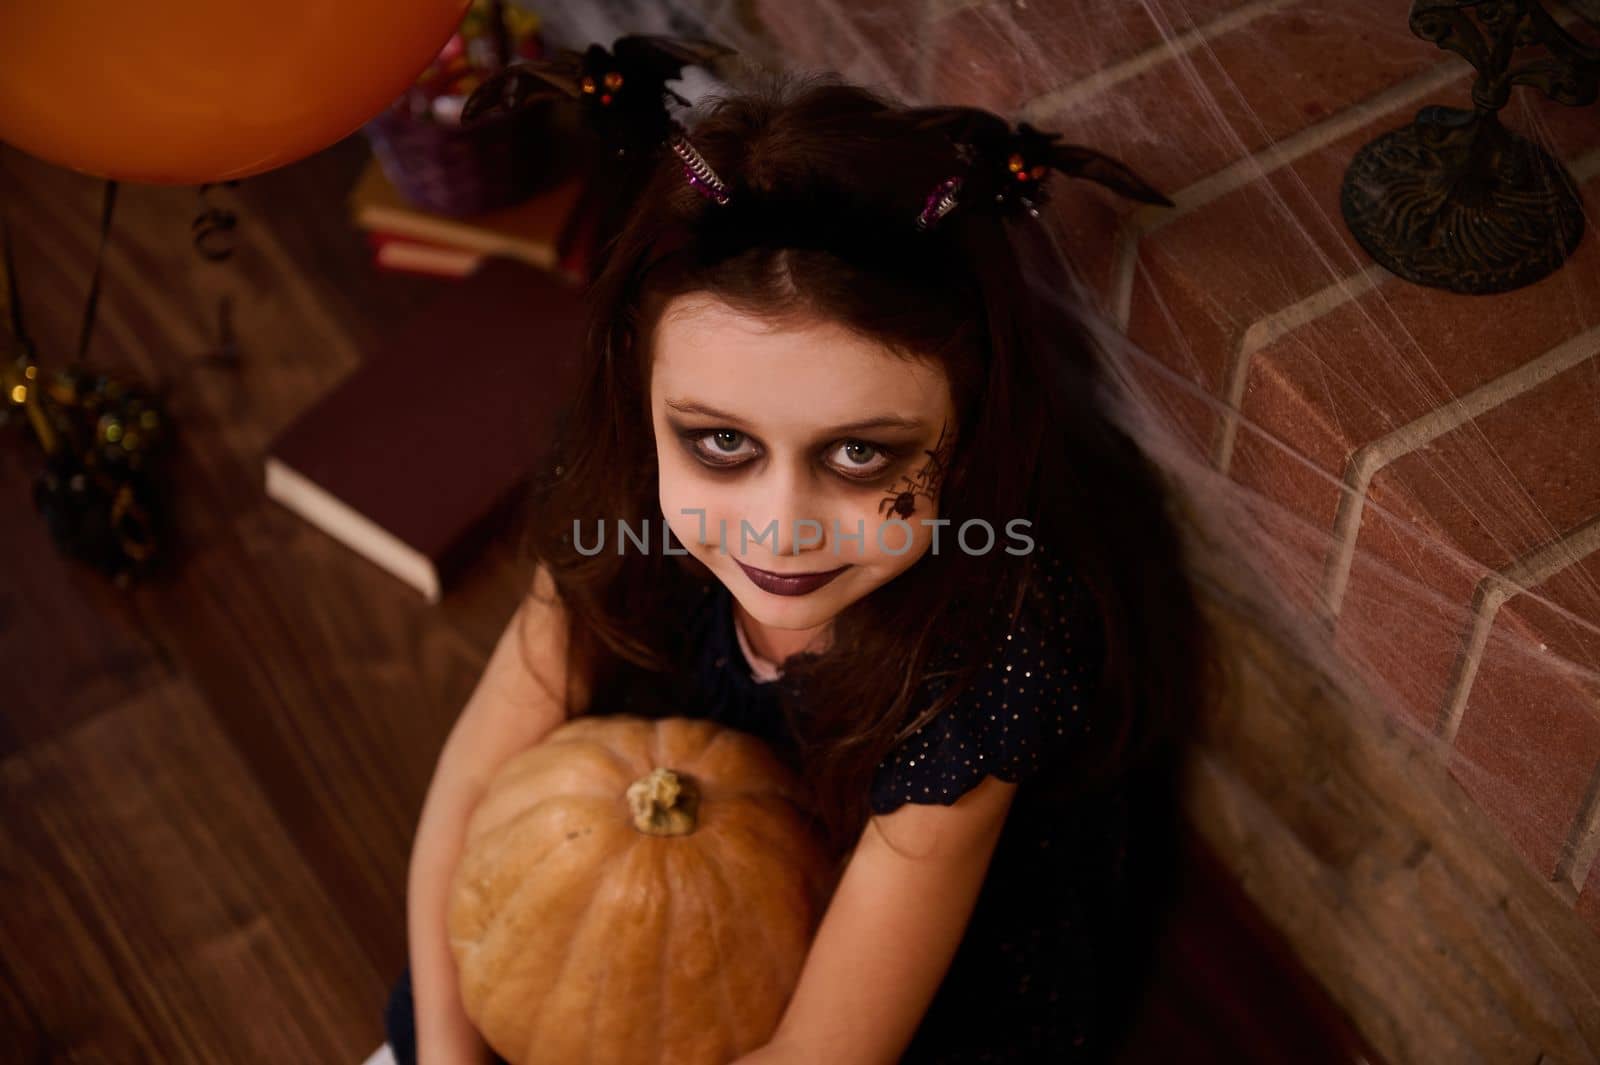 Top view Adorable gothic child, a little girl witch, enchantress, sorceress with face art makeup for Halloween party, hugging a pumpkin, smiles at camera, surrounded by a sorcery book and spider webs